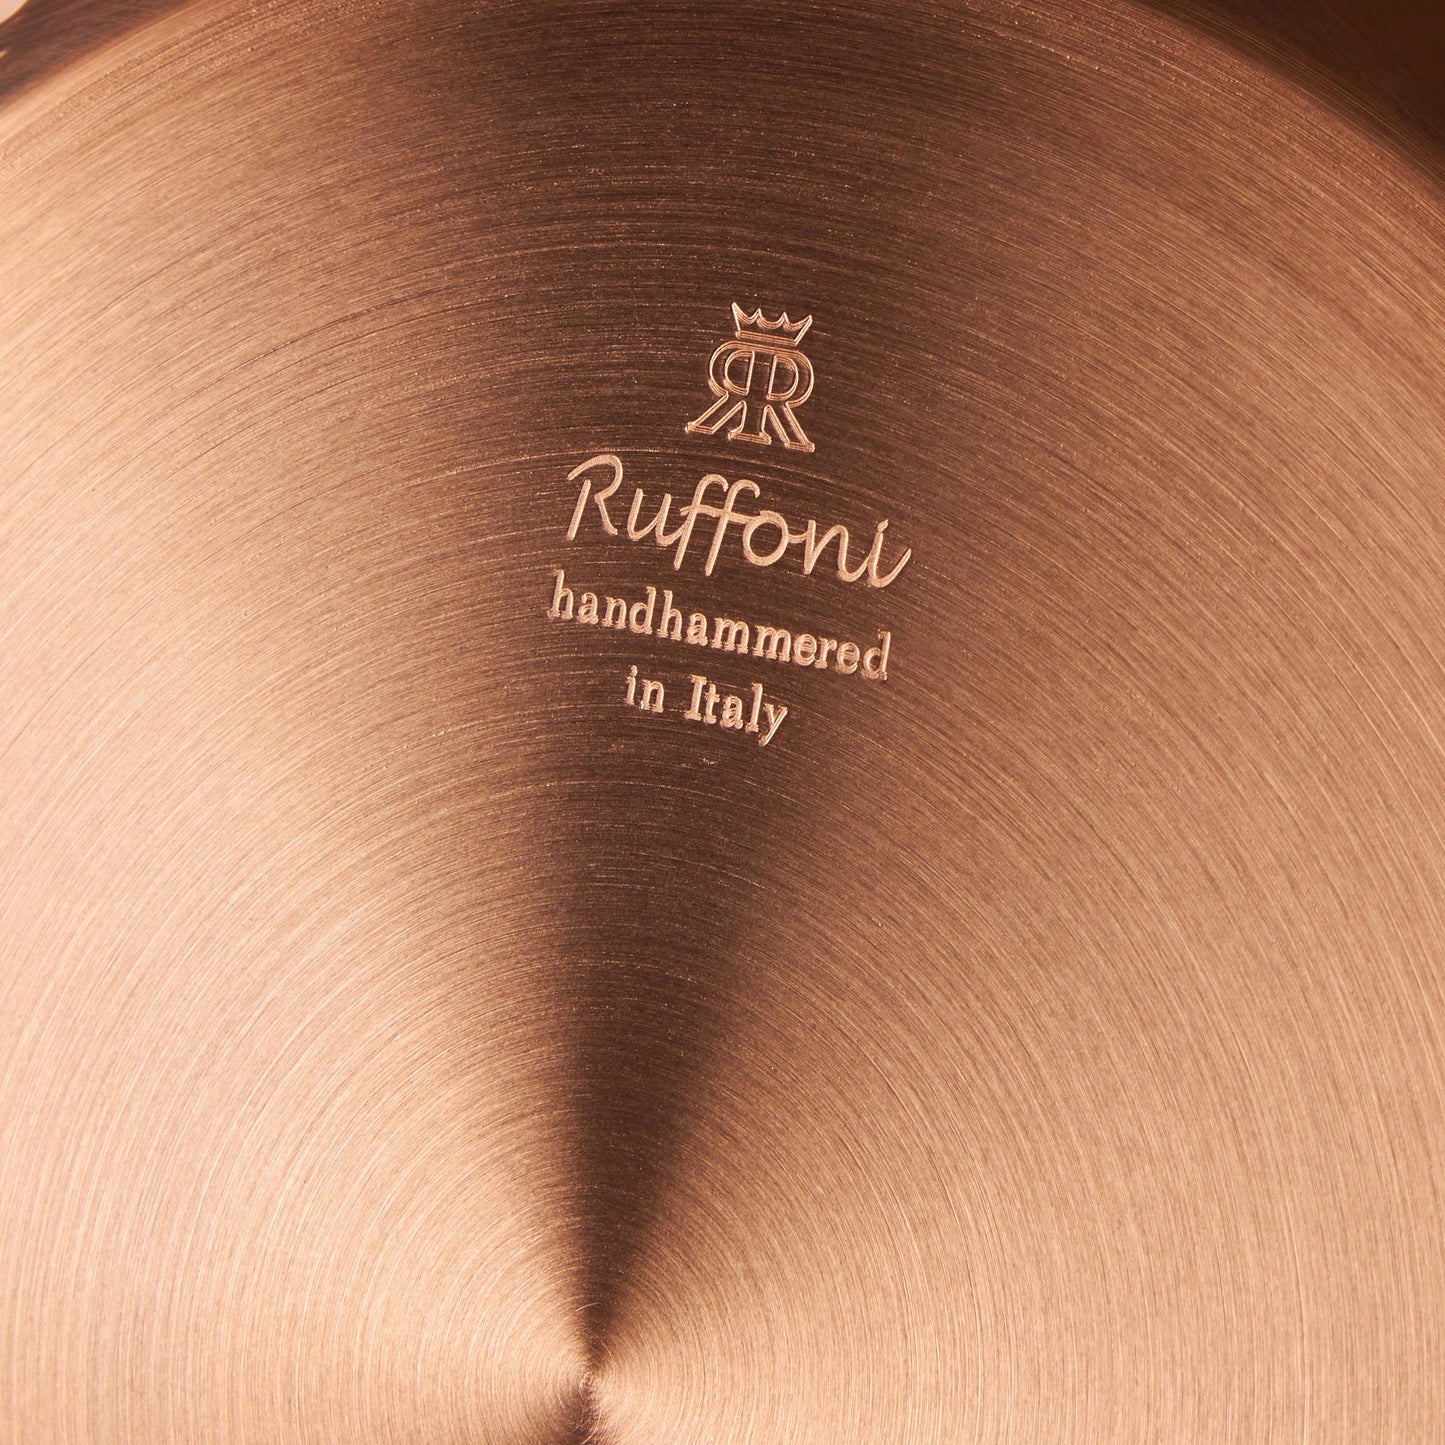 Ruffoni Made in Italy brand logo stamped under Opus Cupra copper sauté for authenticity